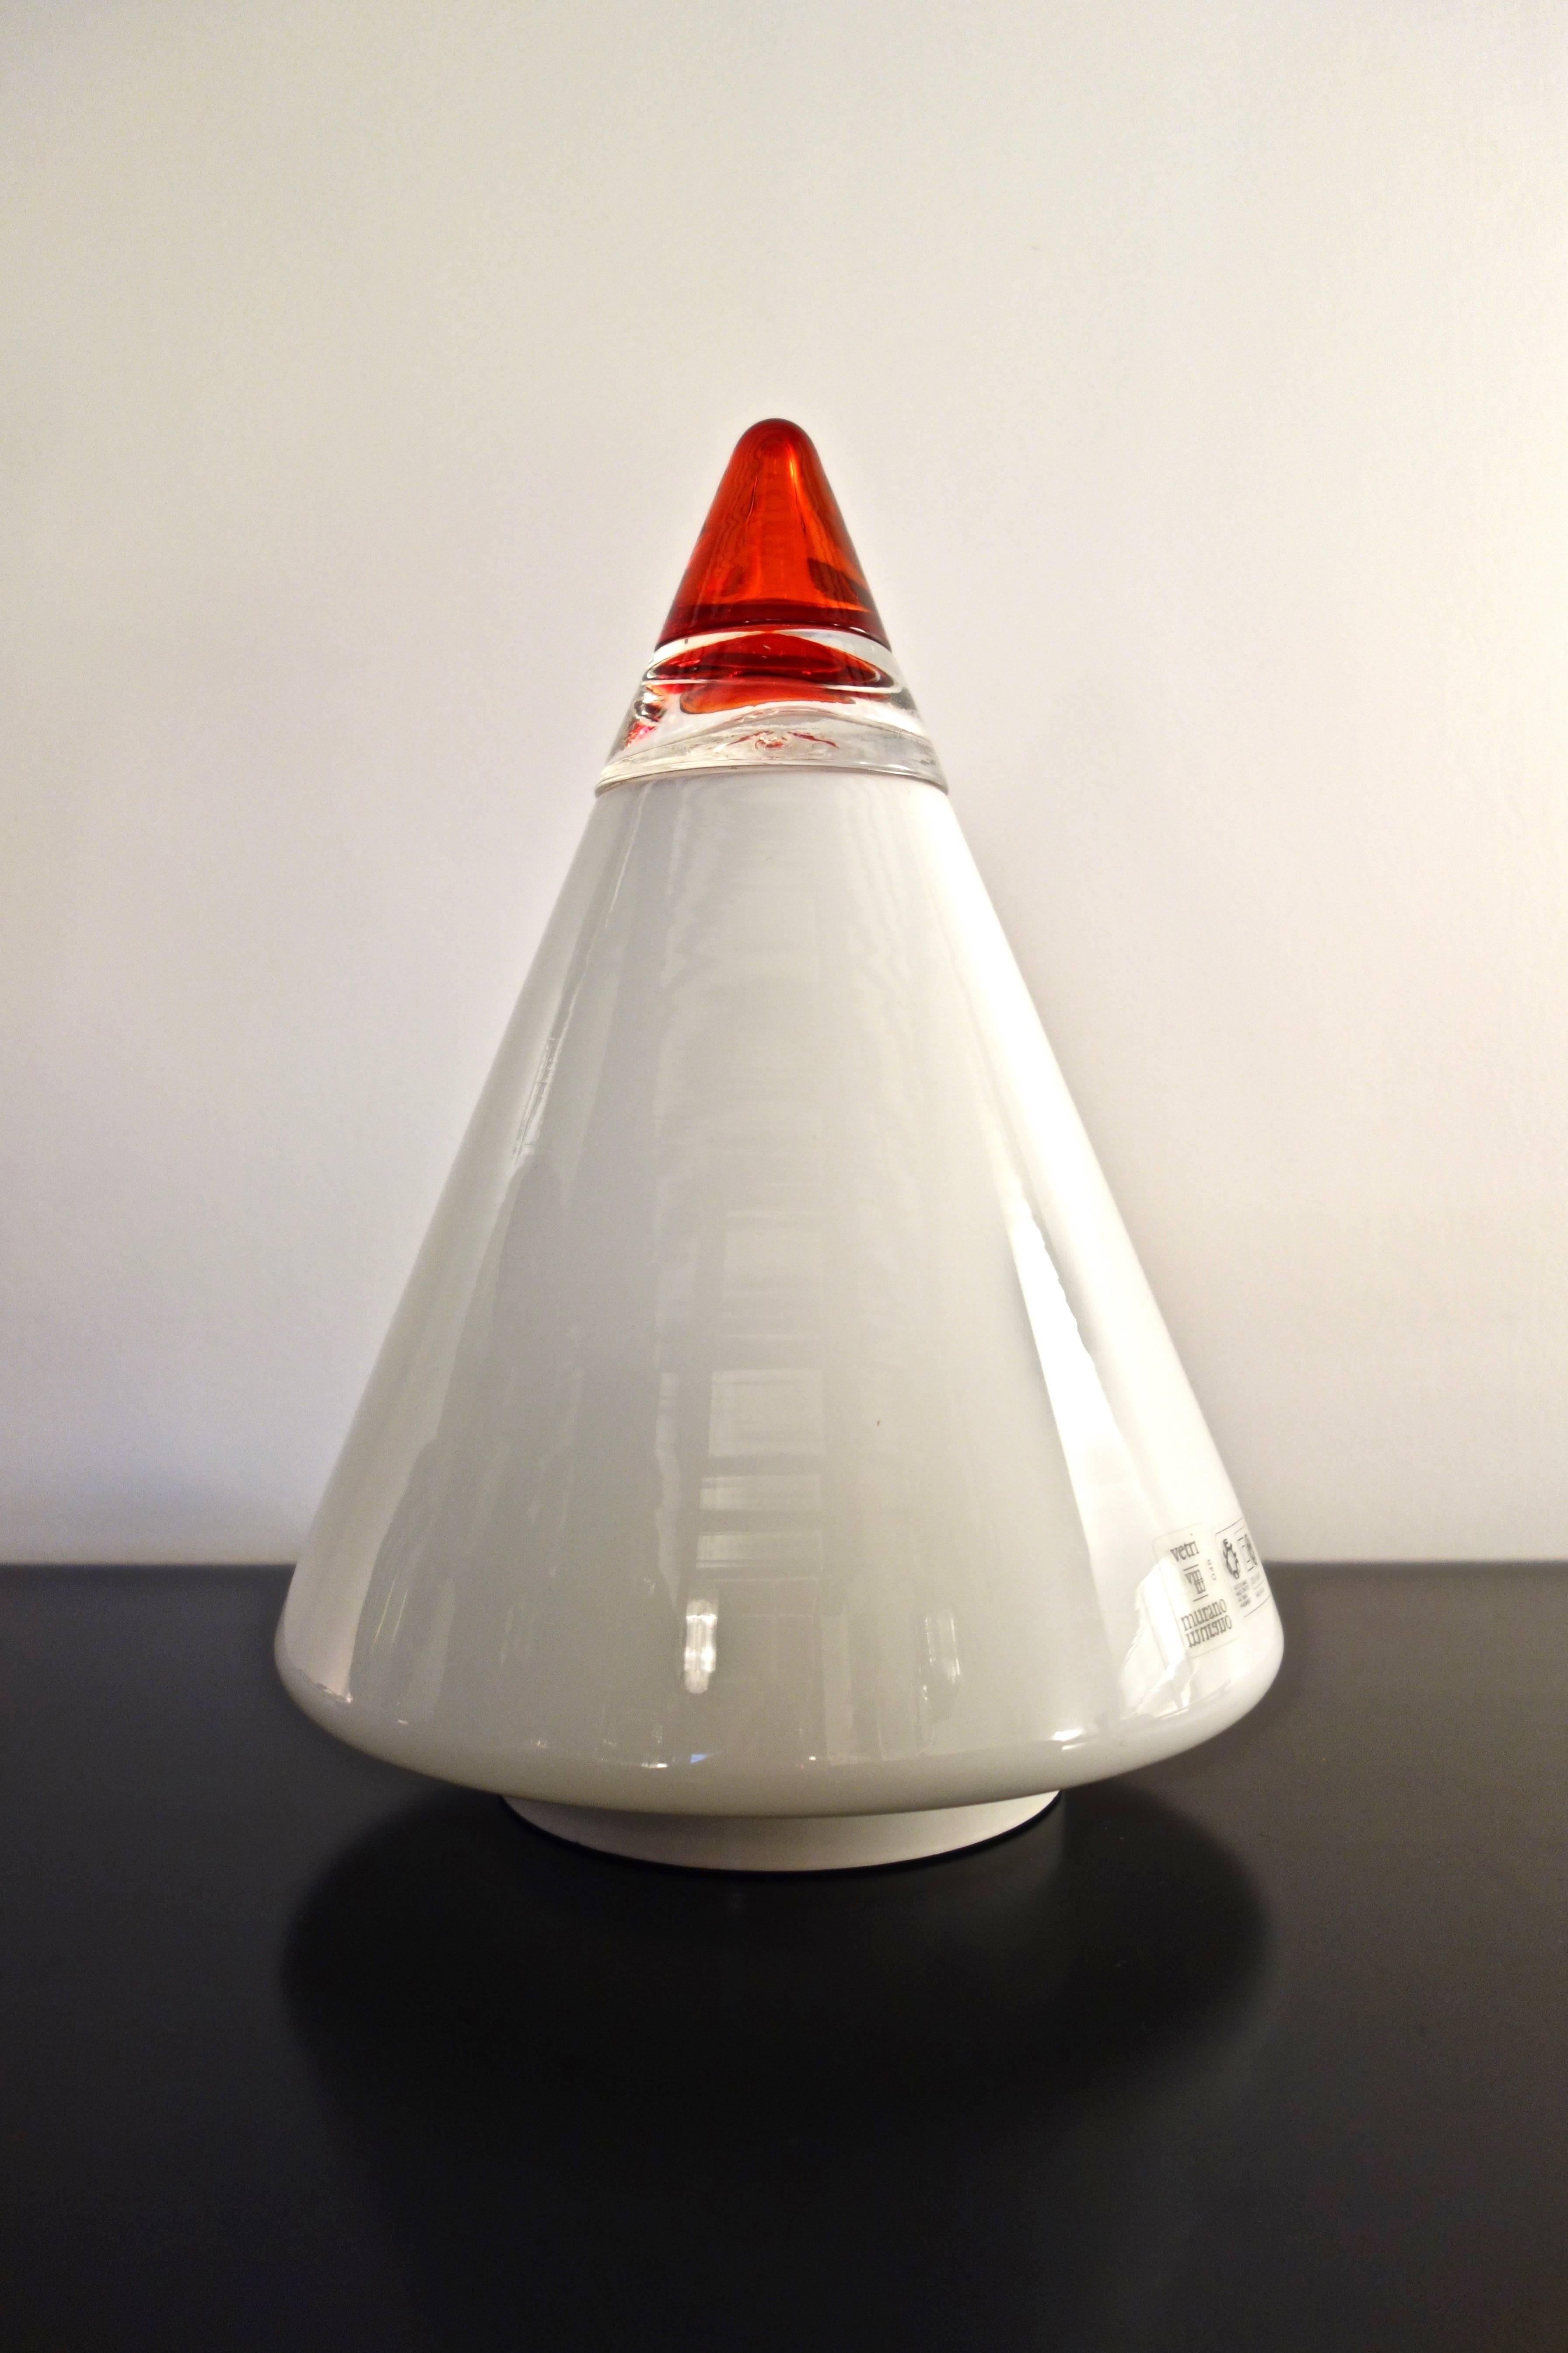 Pair of Rio table lamp by Guisto Toso for Leucos. Italian manufacture in the 1970s. Conical shape in Murano opal blown glass, transparent and red crystal upper part, base in white lacquered aluminum. Screw bulb. Electricity redone. In perfect